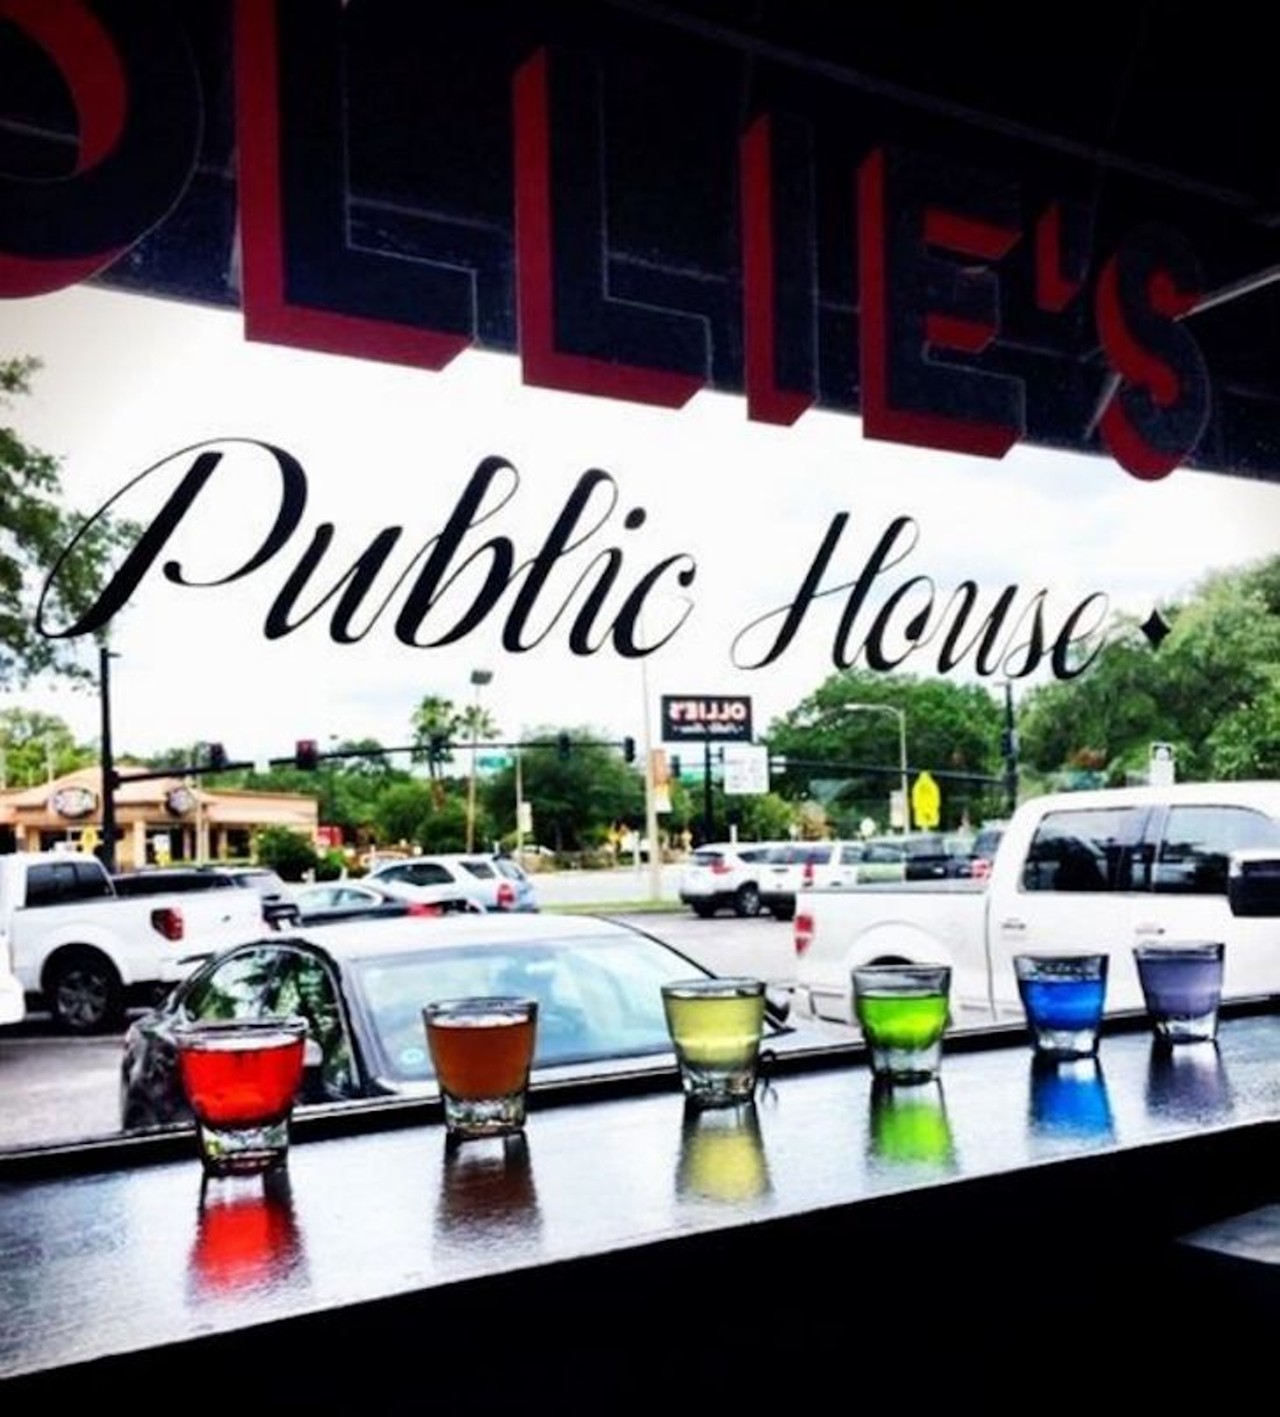 Ollie&#146;s Public House 
3400 Edgewater Drive, 407-999-8934 
Ollie&#146;s is known for the jars of house-made pickles on the table, and for serving up a cold one to enjoy on a hot afternoon. The company is always great at this dog-friendly hangout with live music on some nights. Doors open at 11 a.m.
Photo via olliespublichouse/Instagram